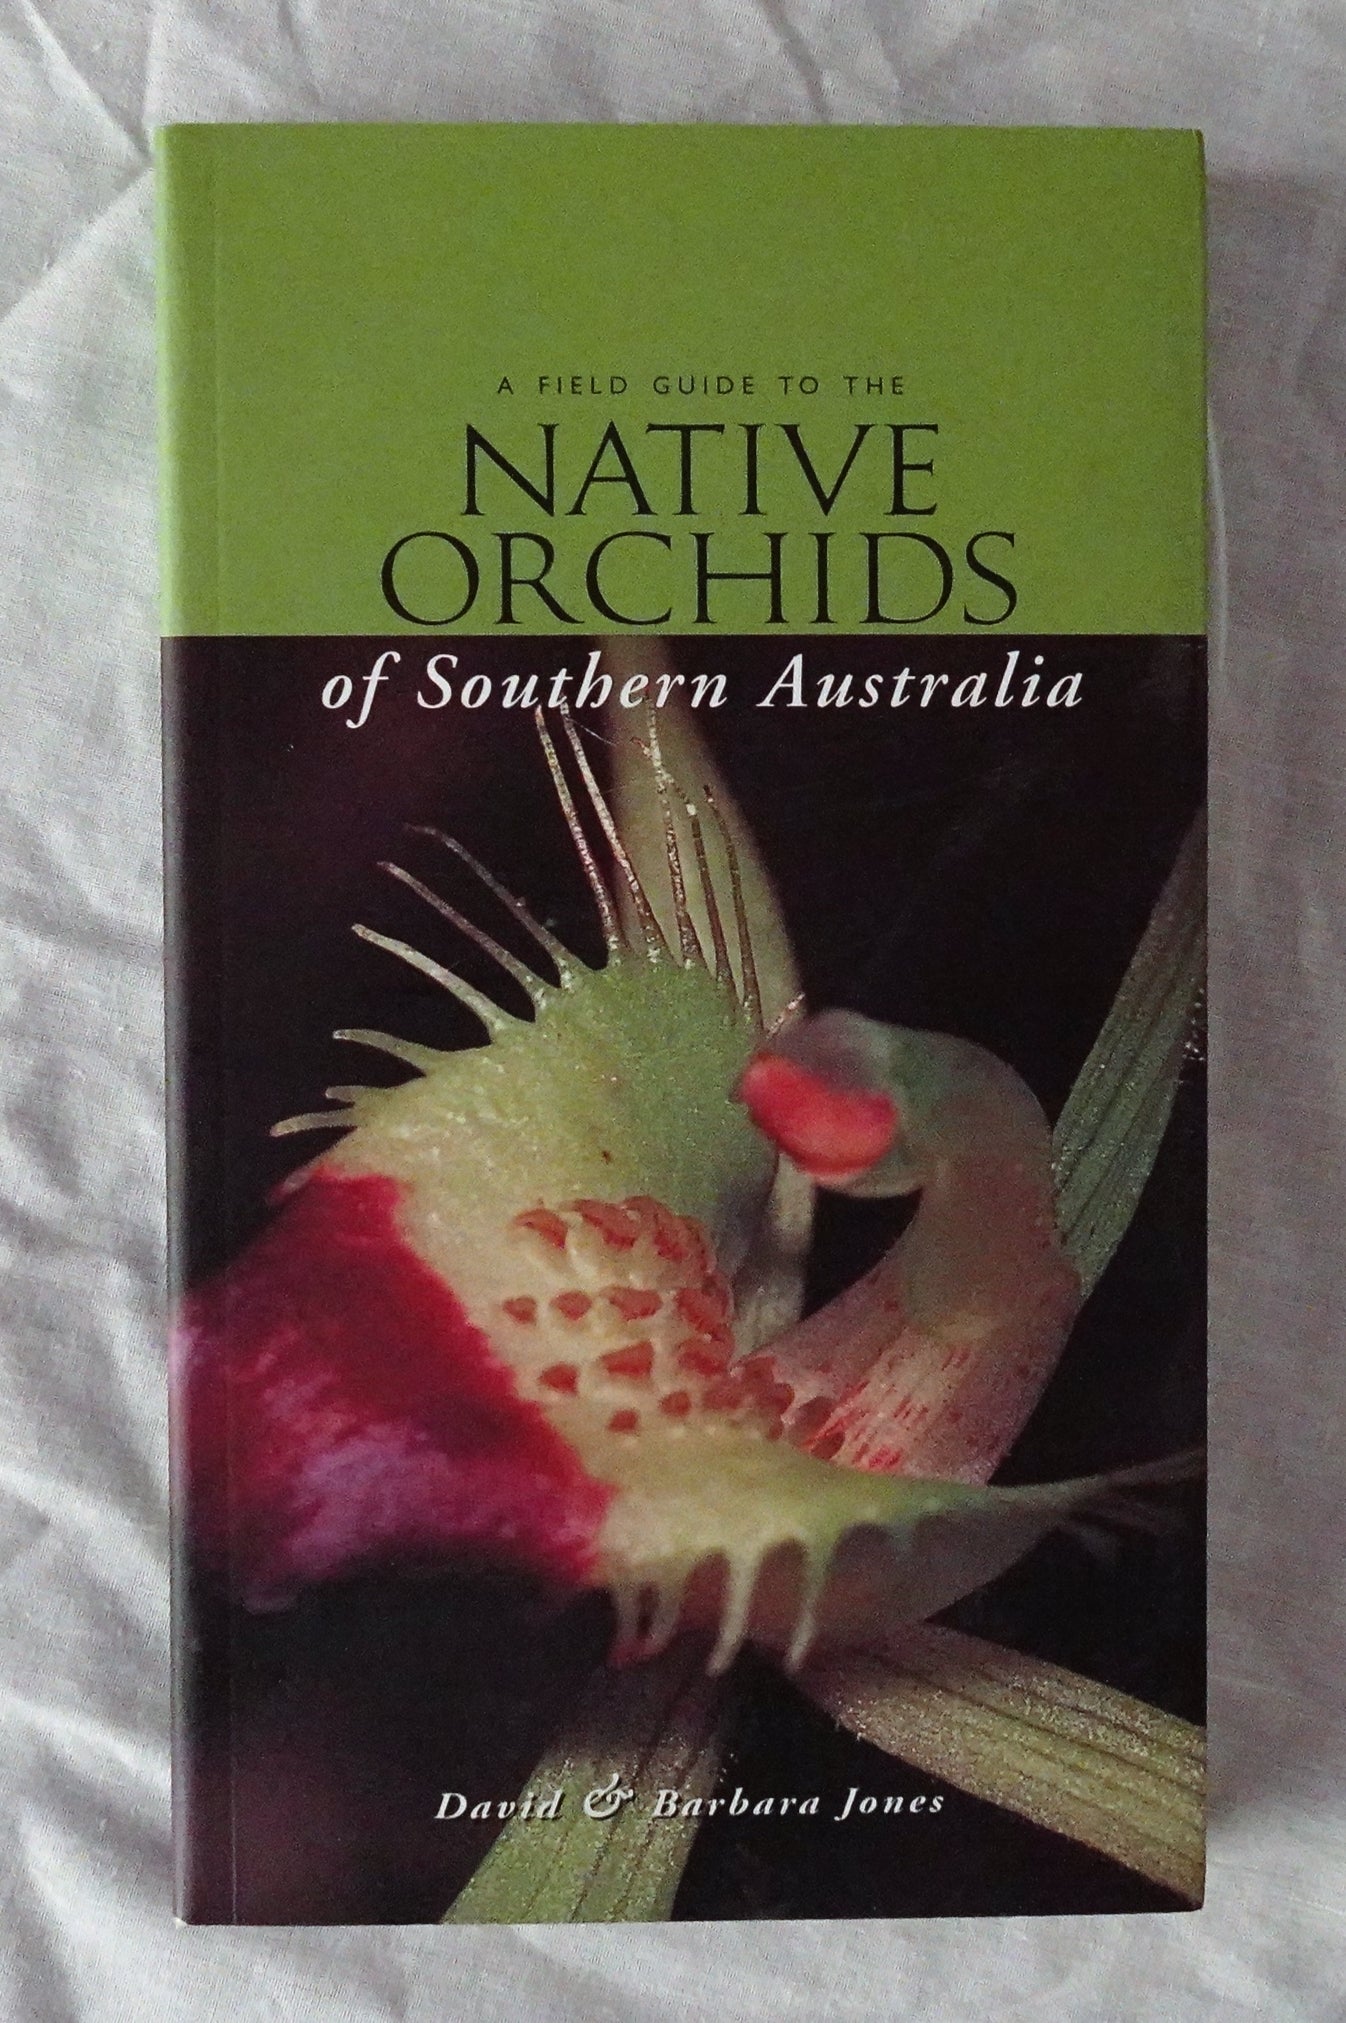 A Field Guide to the Native Orchids of Southern Australia by David